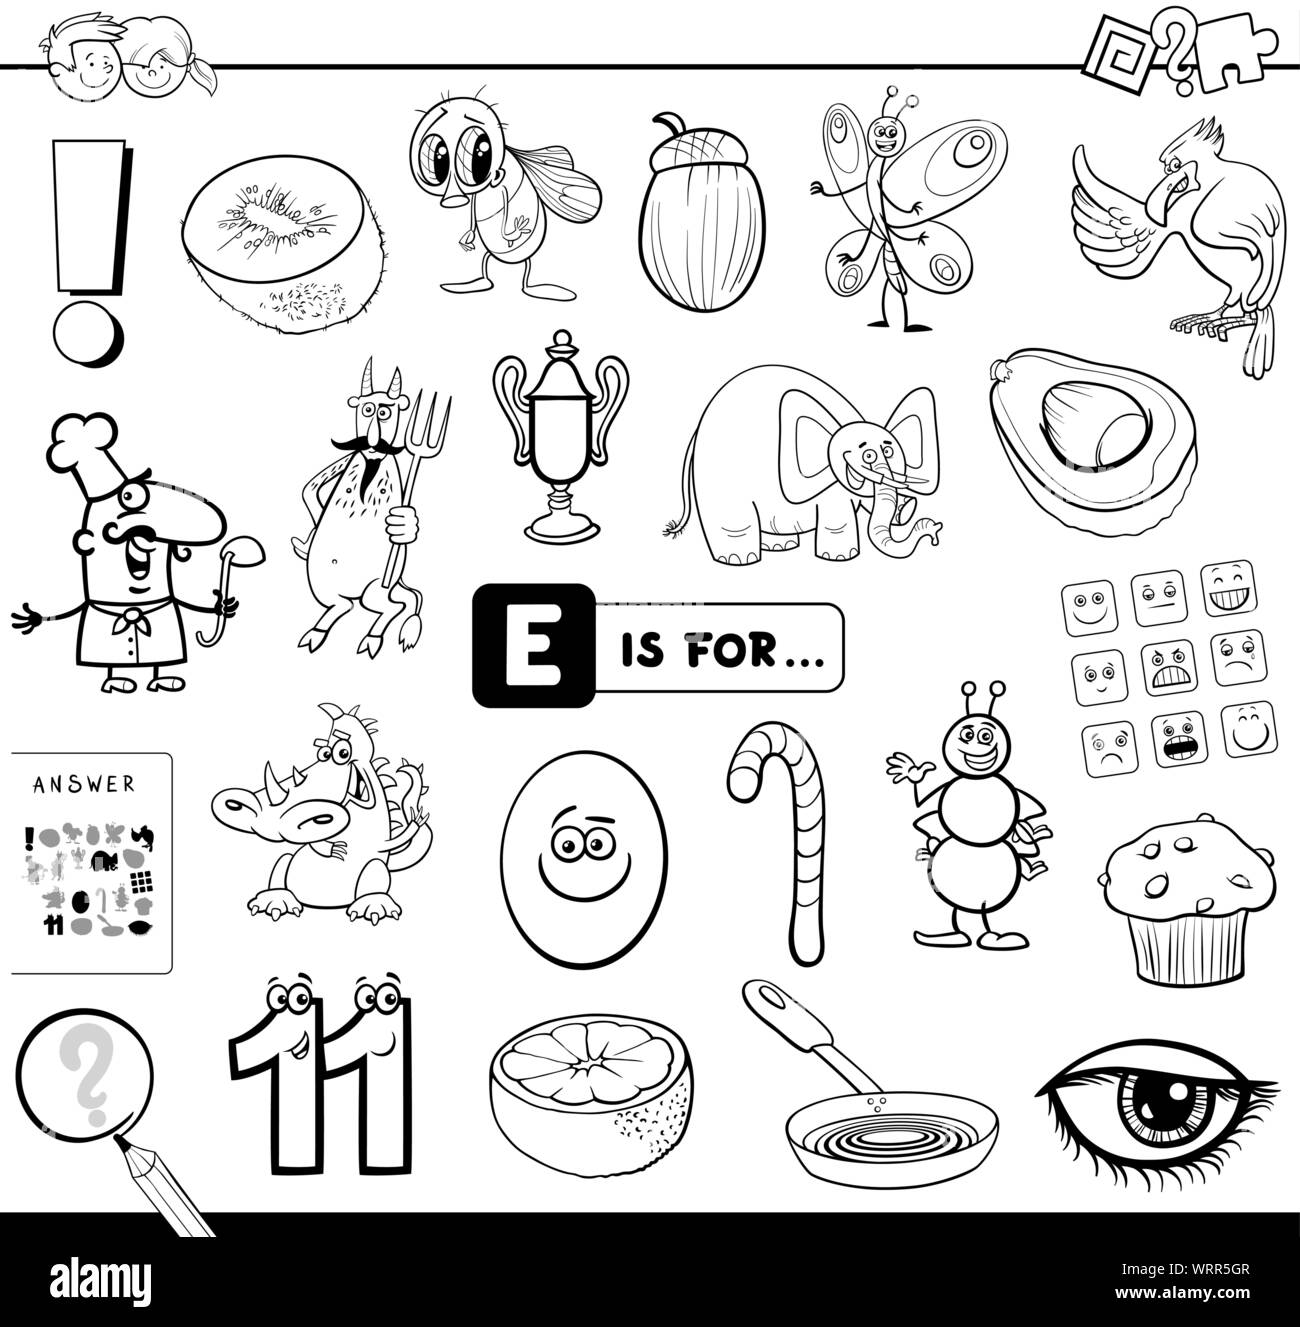 Black and white cartoon illustration of finding picture starting with letter e educational task worksheet for children coloring book stock vector image art